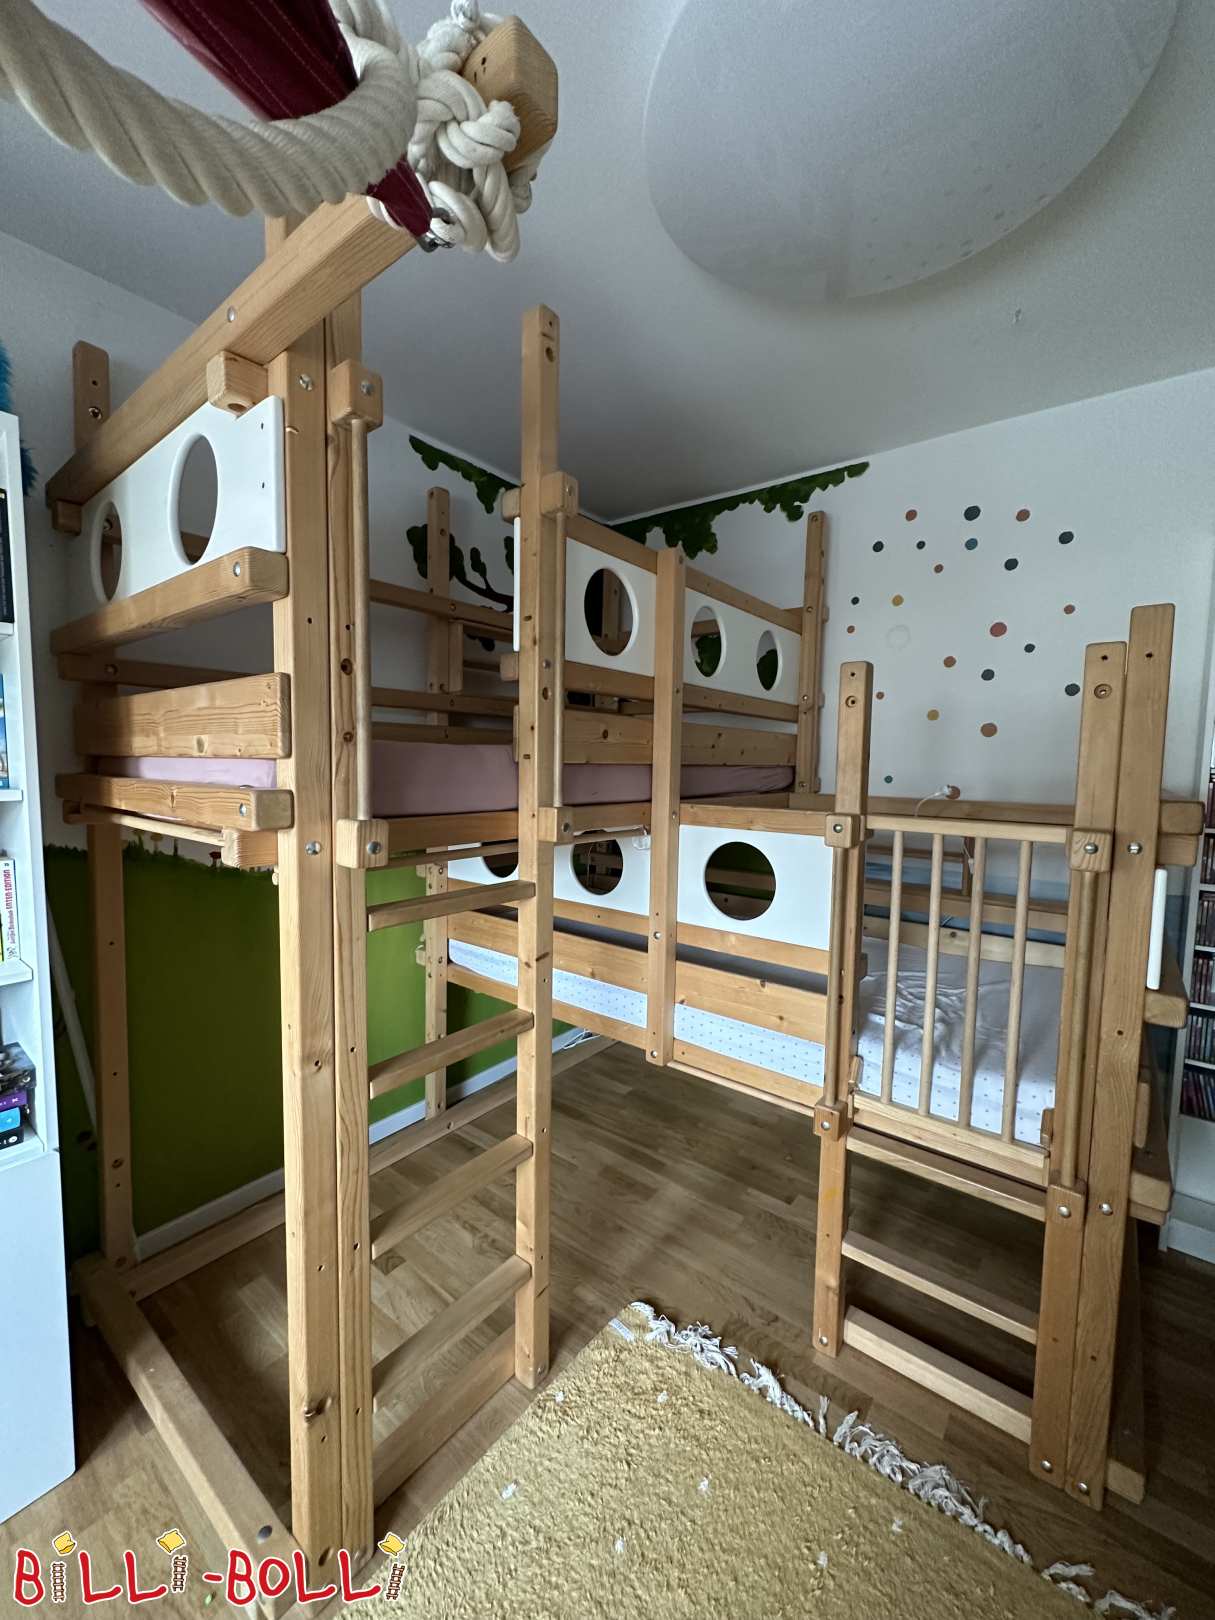 Double-top bed over corner oiled in spruce, near Wiesbaden (Category: Both-Up Bunk Beds pre-owned)